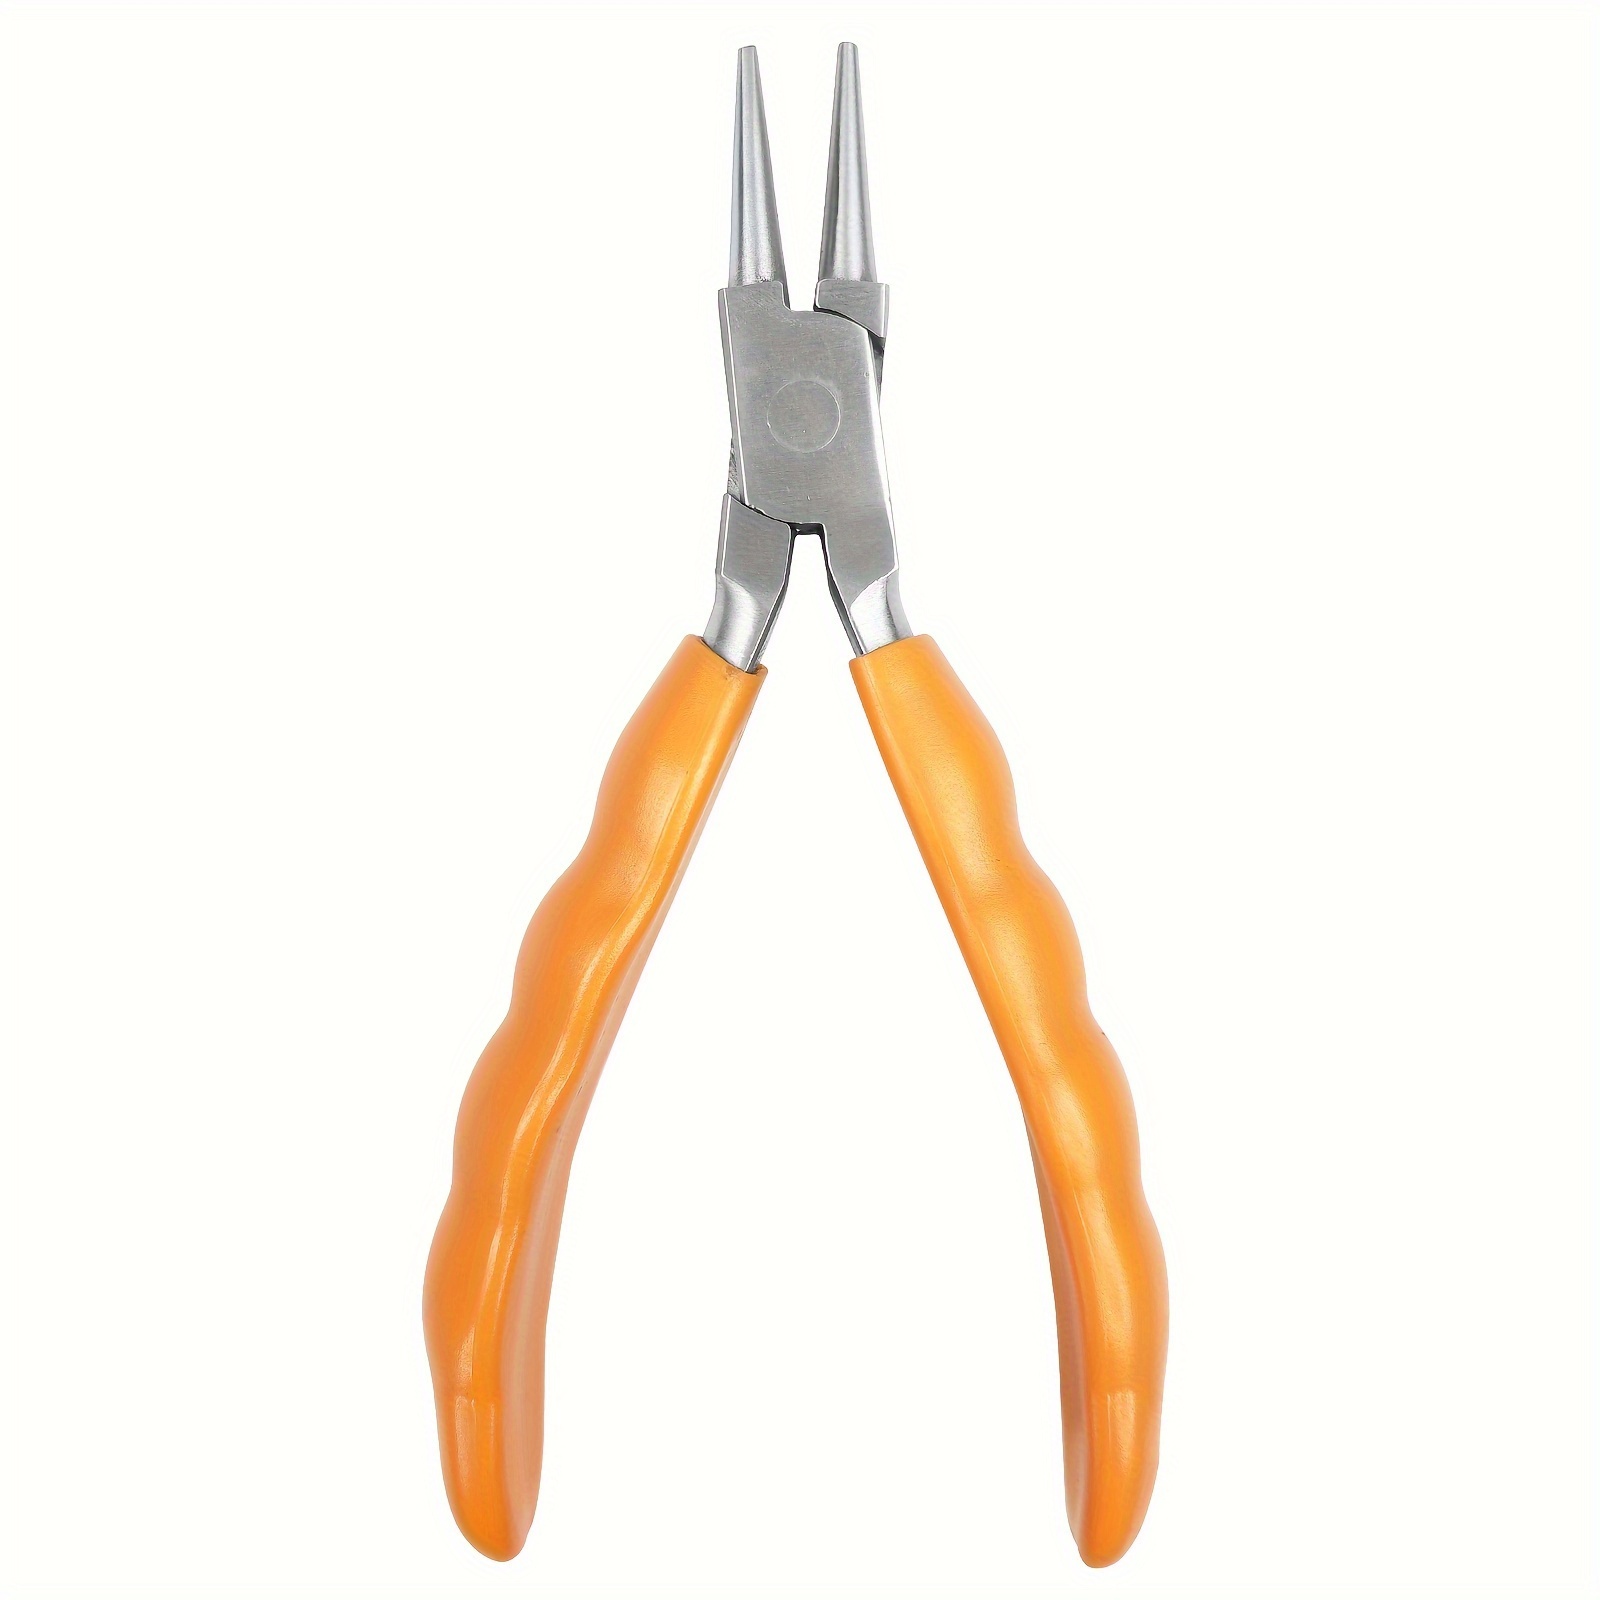 Stainless Steel Round Nose Pliers for Crafting and Repairing